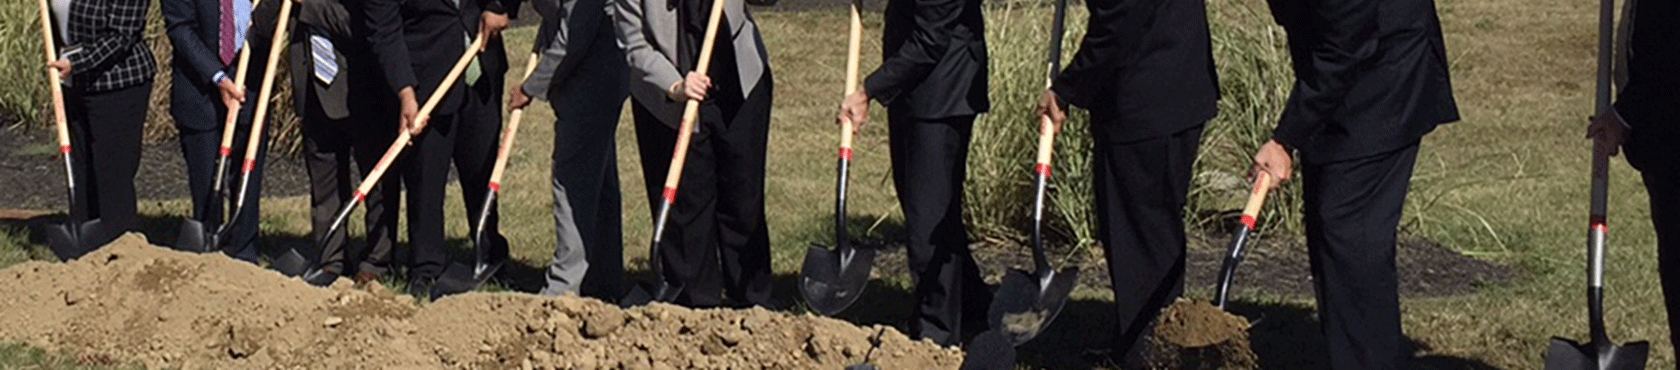 Group breaking construction ground with shovels